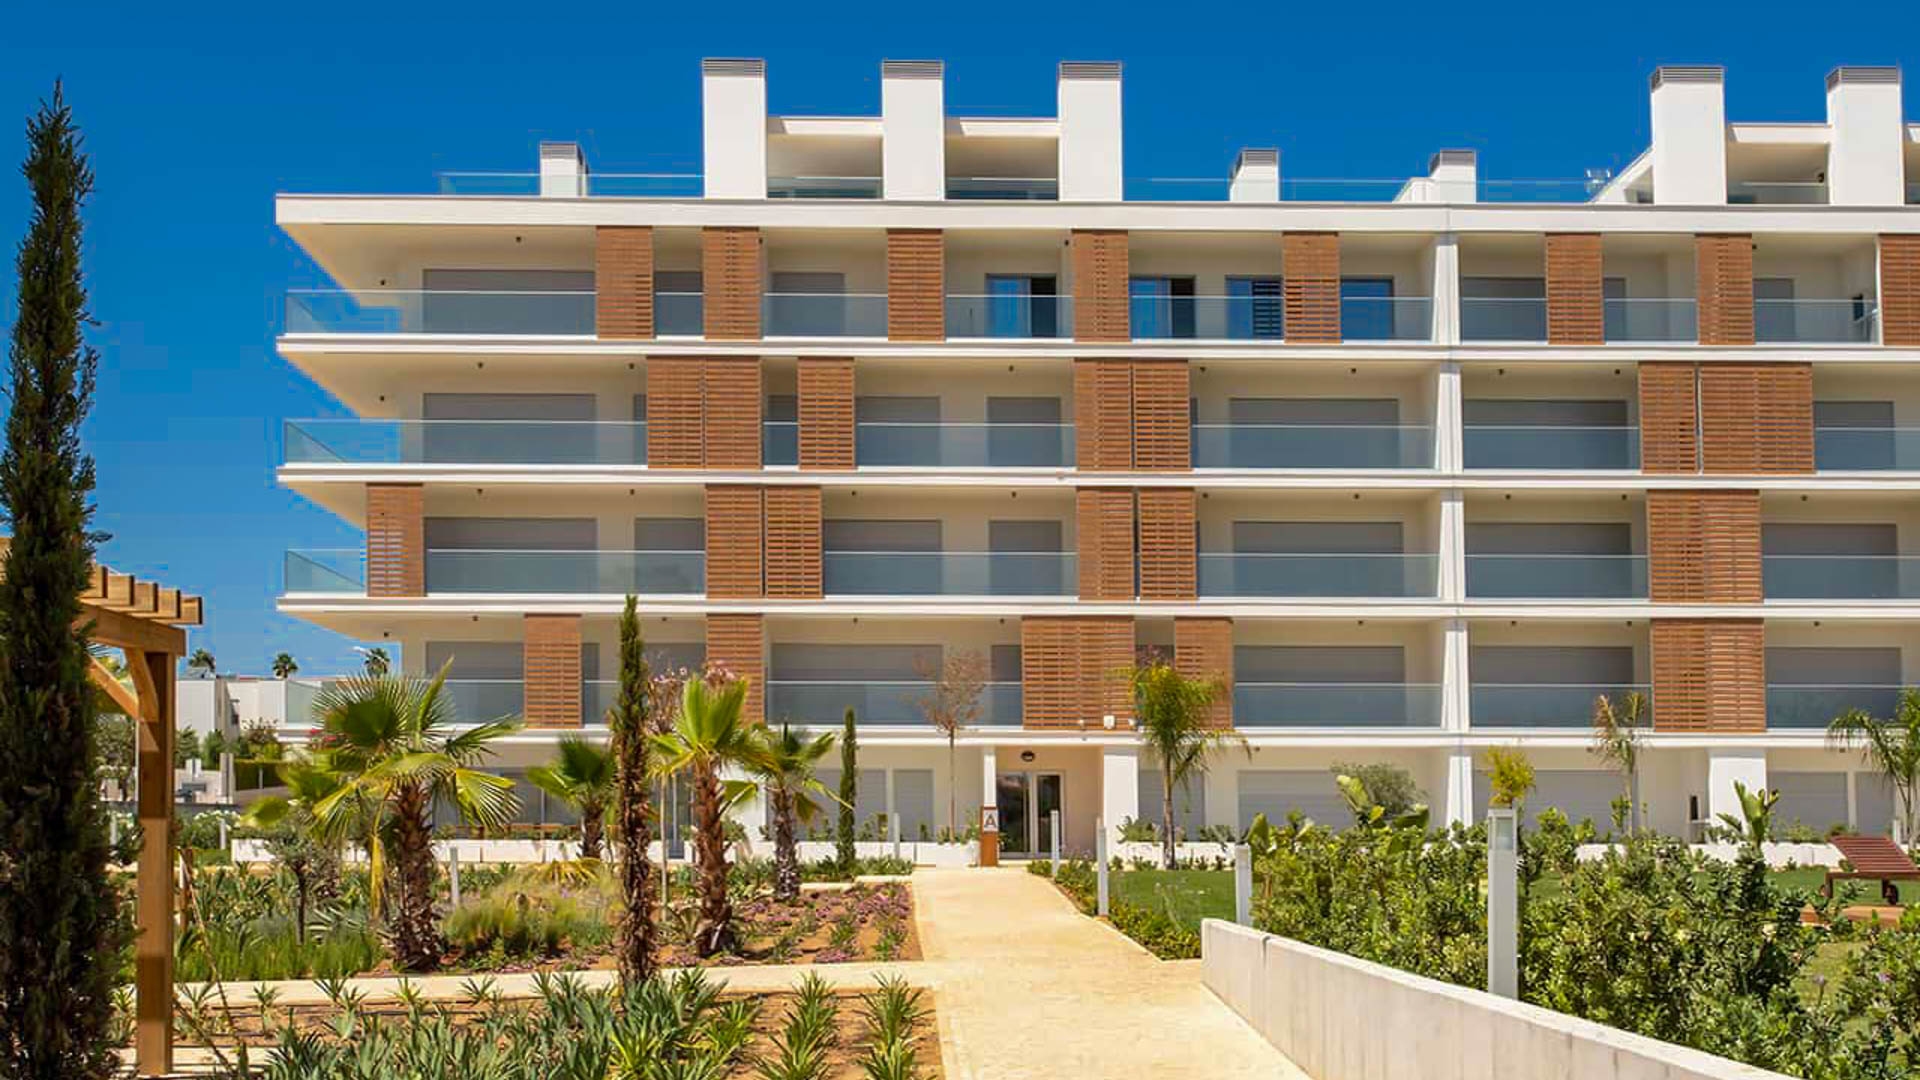 New luxury 1 Bedroom Apartments with pool, Albufeira | VM1868 Luxury 1 Bedroom apartments in a new Eco friendly development, just a stone’s throw from Albufeira’s stunning beaches and amazing amenities.